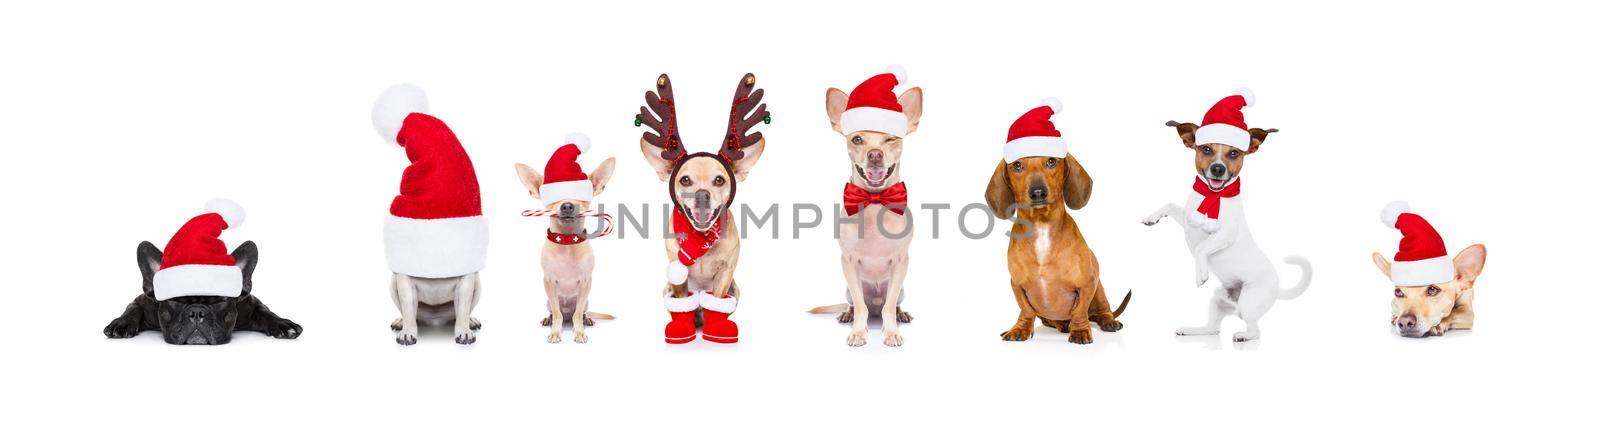 christmas  santa claus row of dogs isolated on white background,  with   funny  red holidays hat  and boots